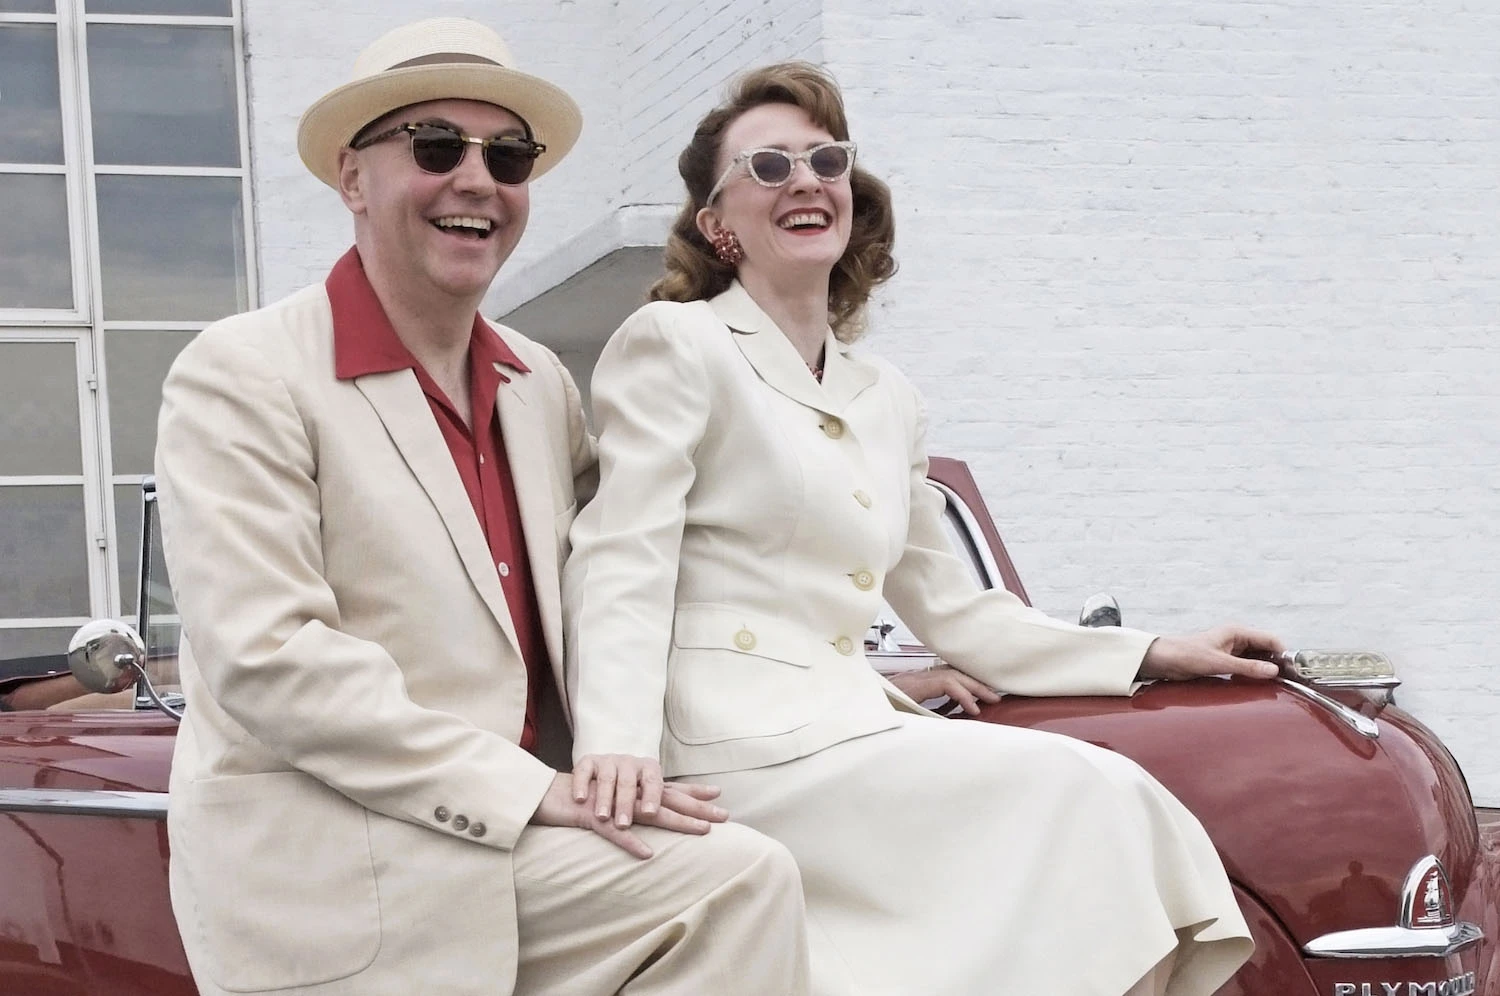 Robin and Colette sat on their 1947 American car